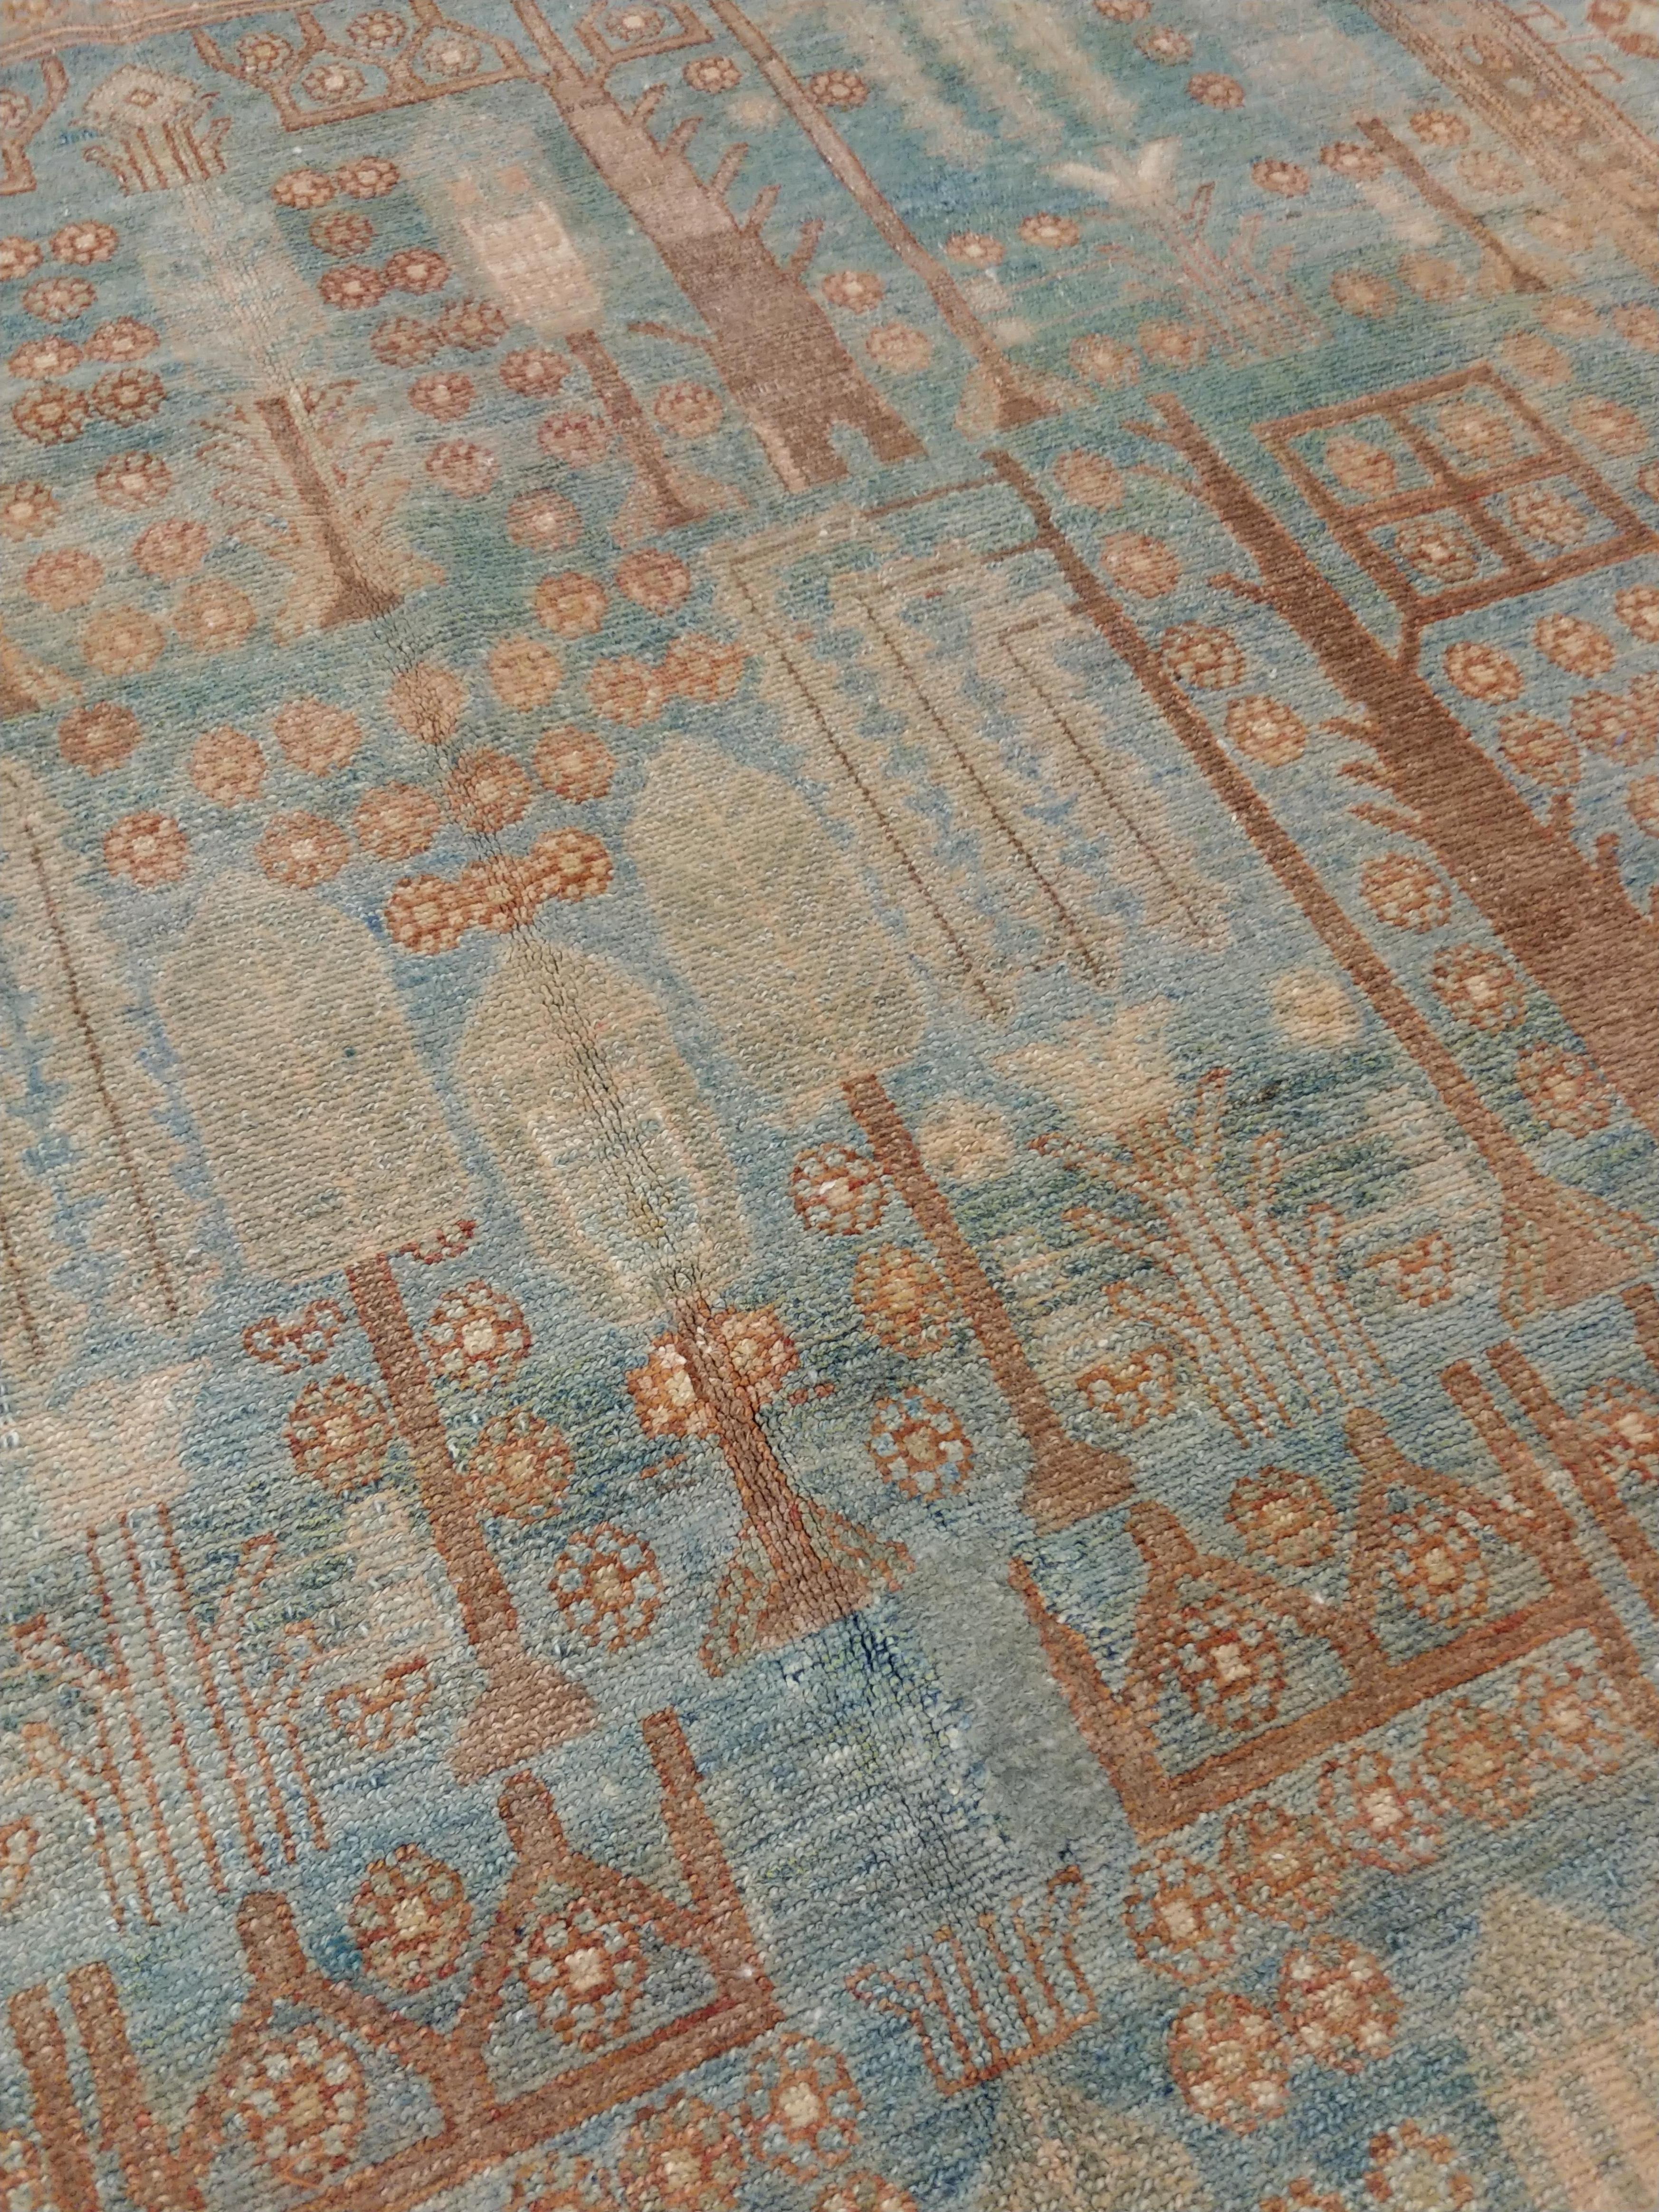 Antique Persian Malayer Rug, Handmade Oriental Rugs Caramel Light Blue, Cream In Excellent Condition For Sale In Port Washington, NY